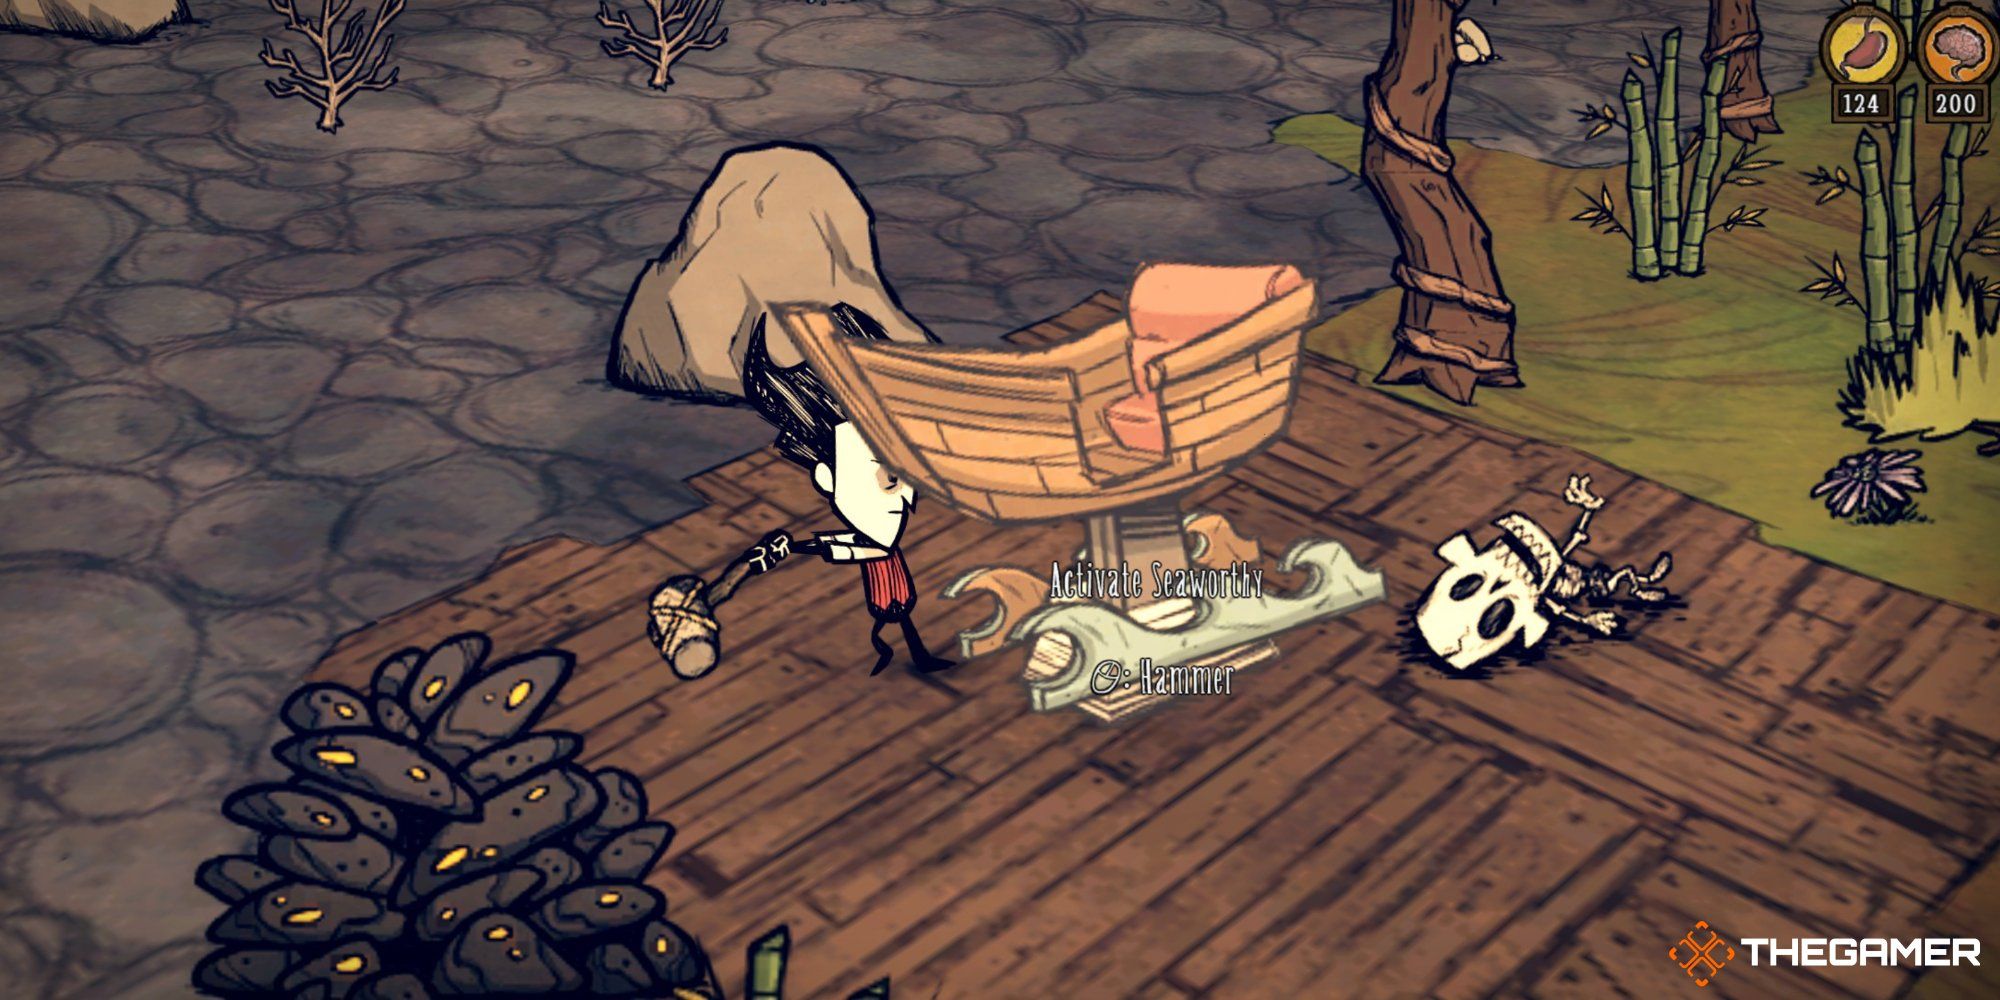 The Seaworthy In Don't Starve Together